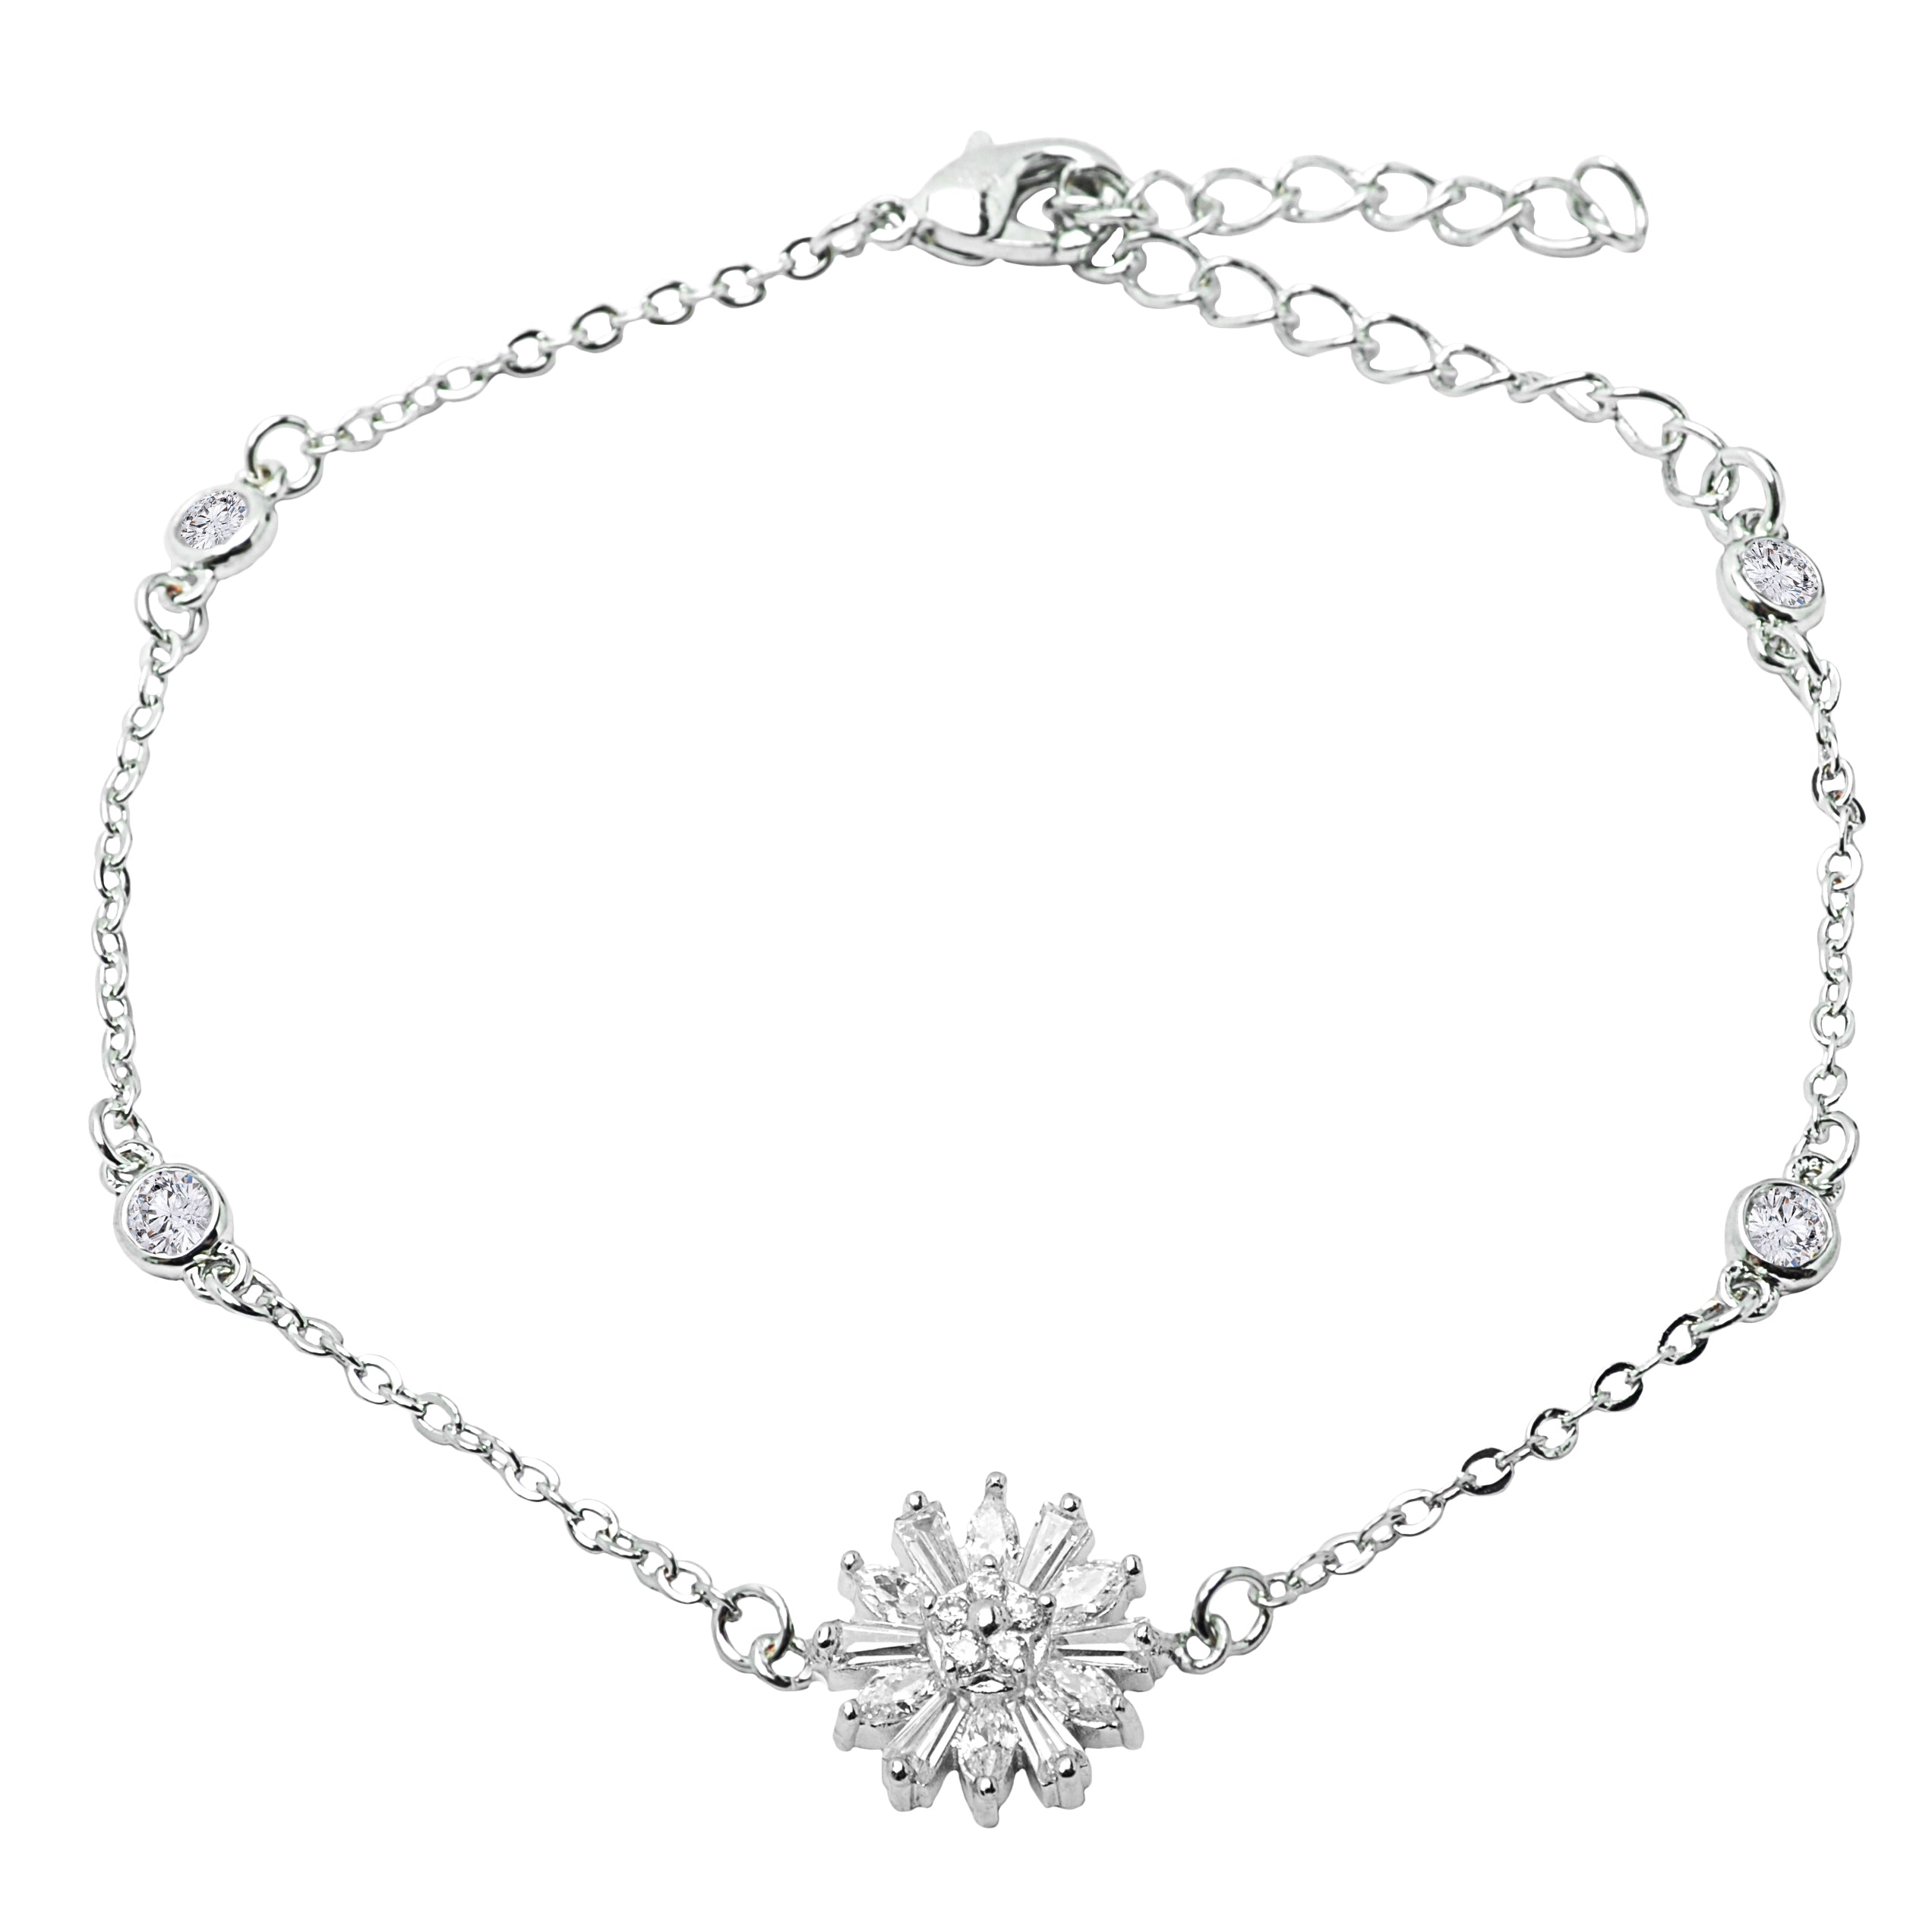 Astara 18k White Gold Plated Bracelet with Crystals